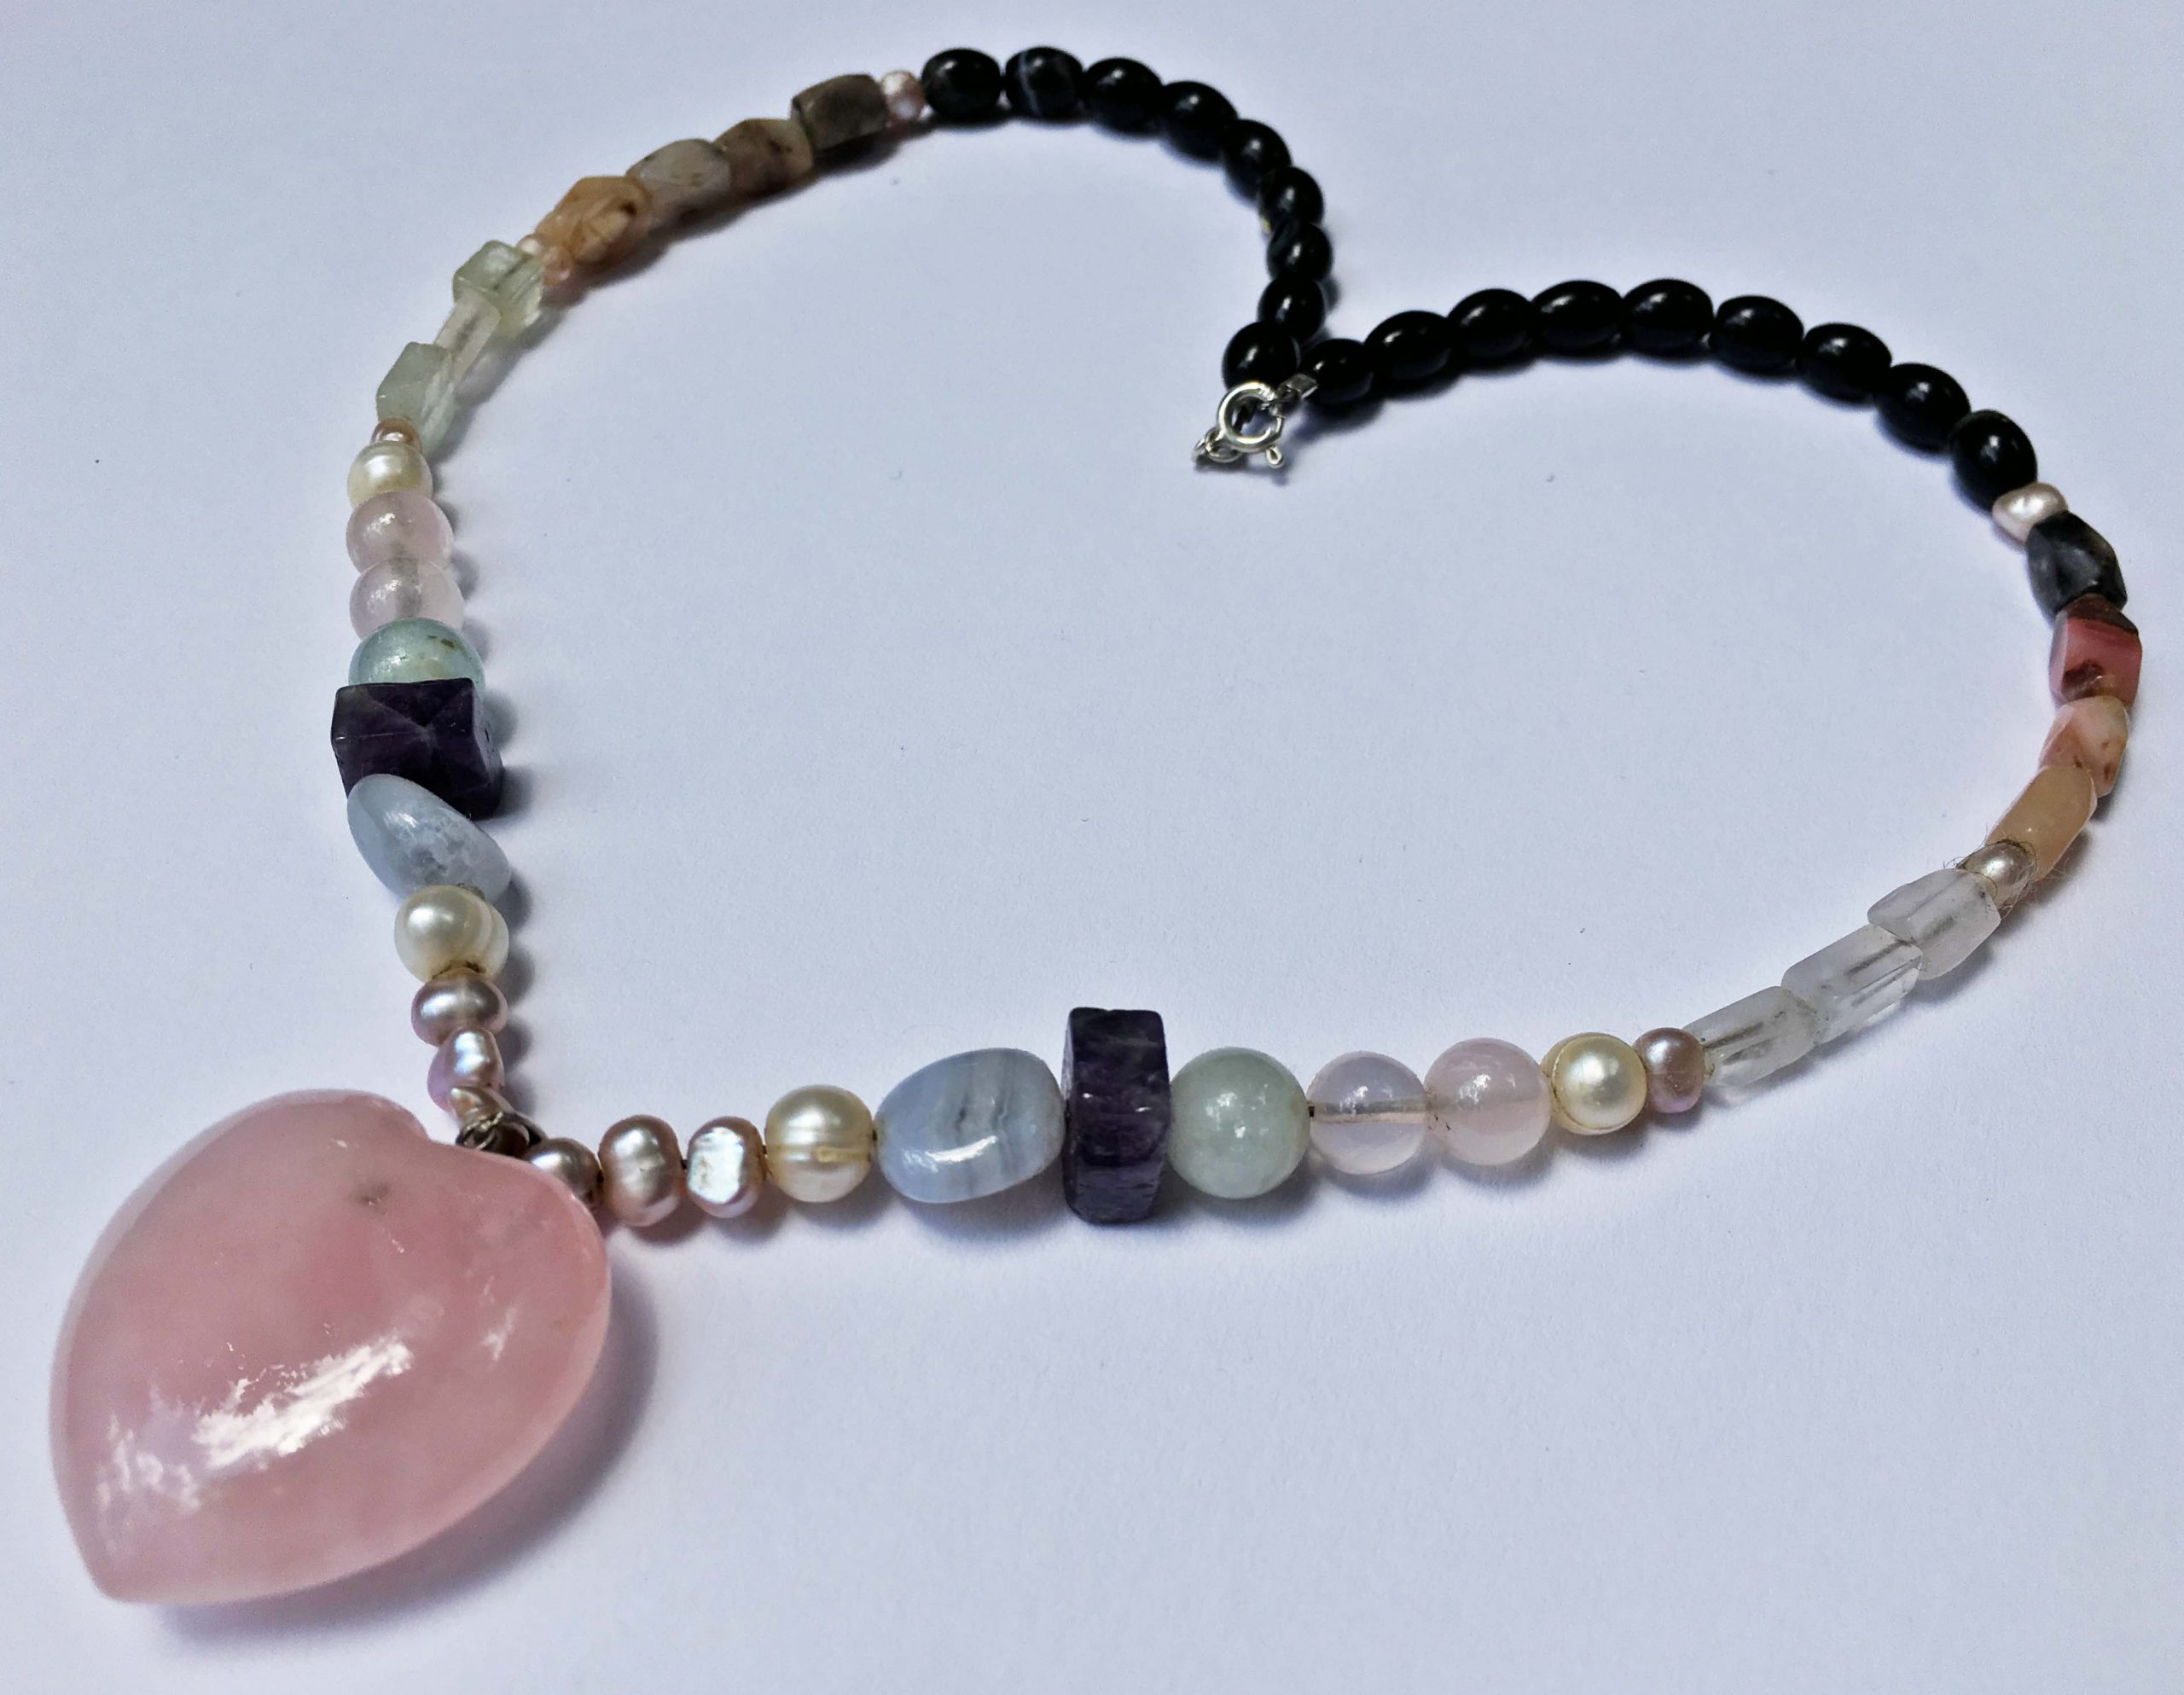 Buy Chakra Crystal Stone Necklace Online - Meek Planet